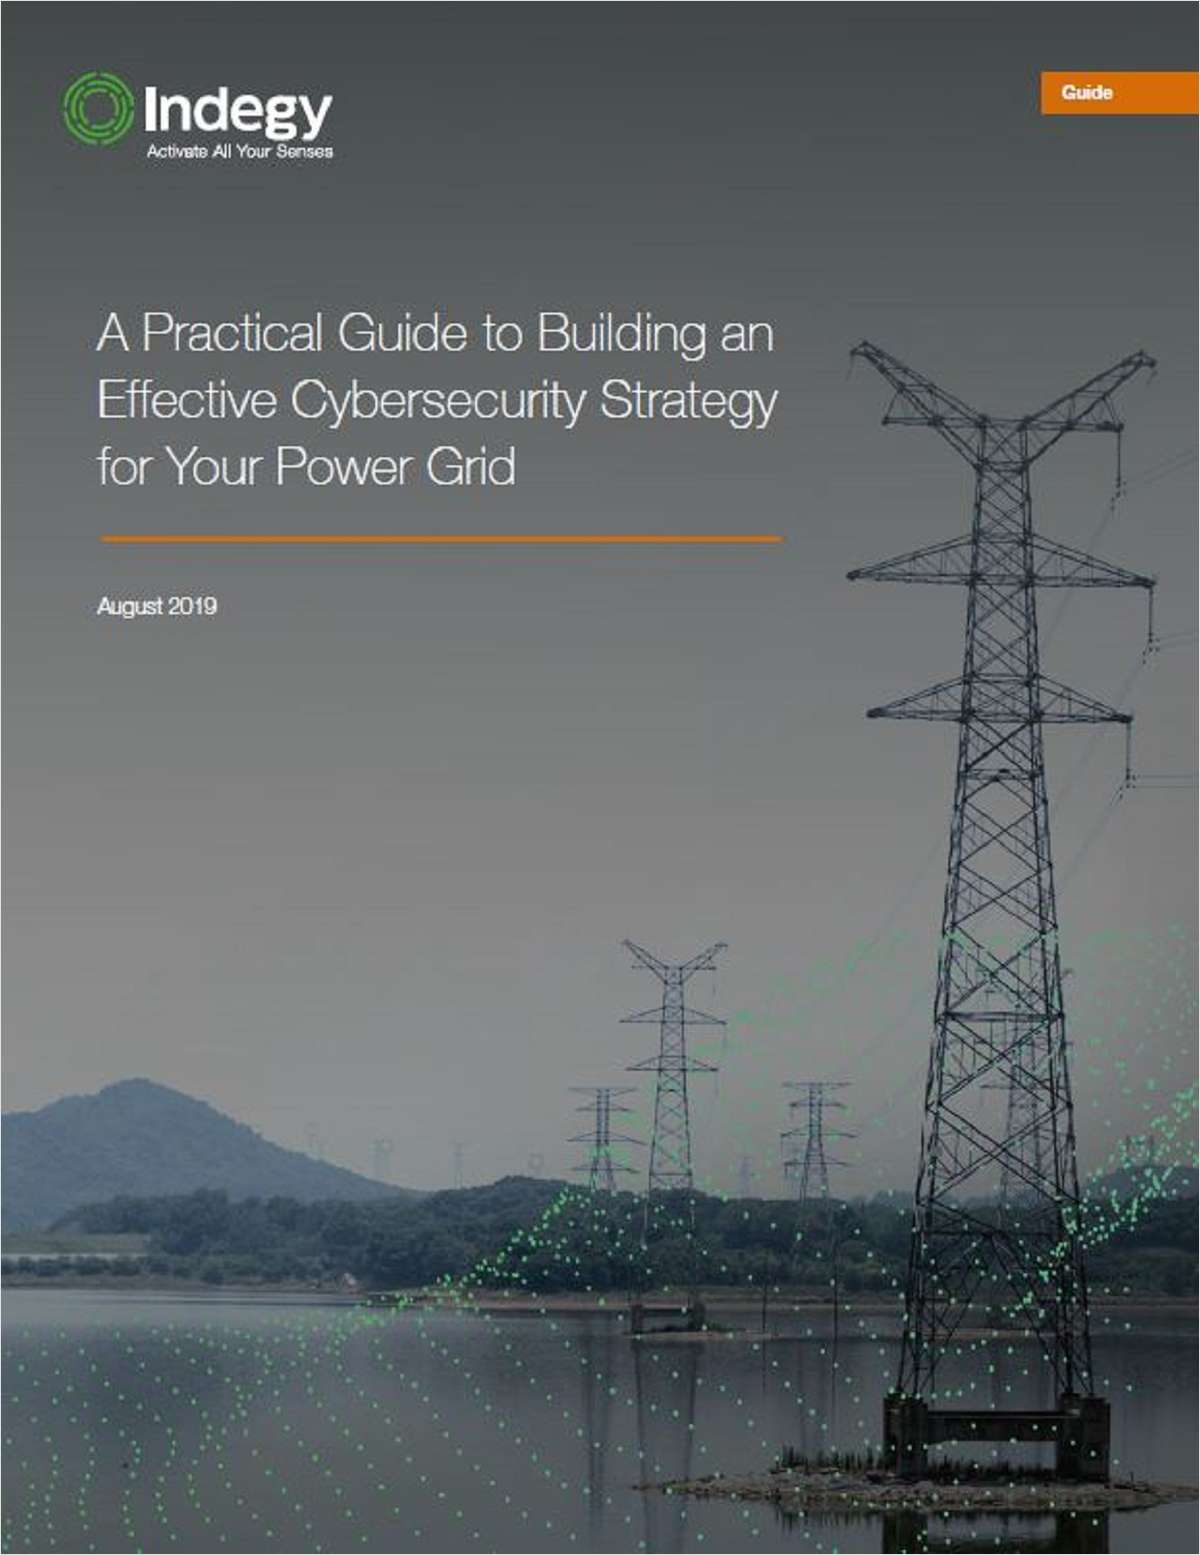 ICS Cyber Security Guide for the Electrical Grid